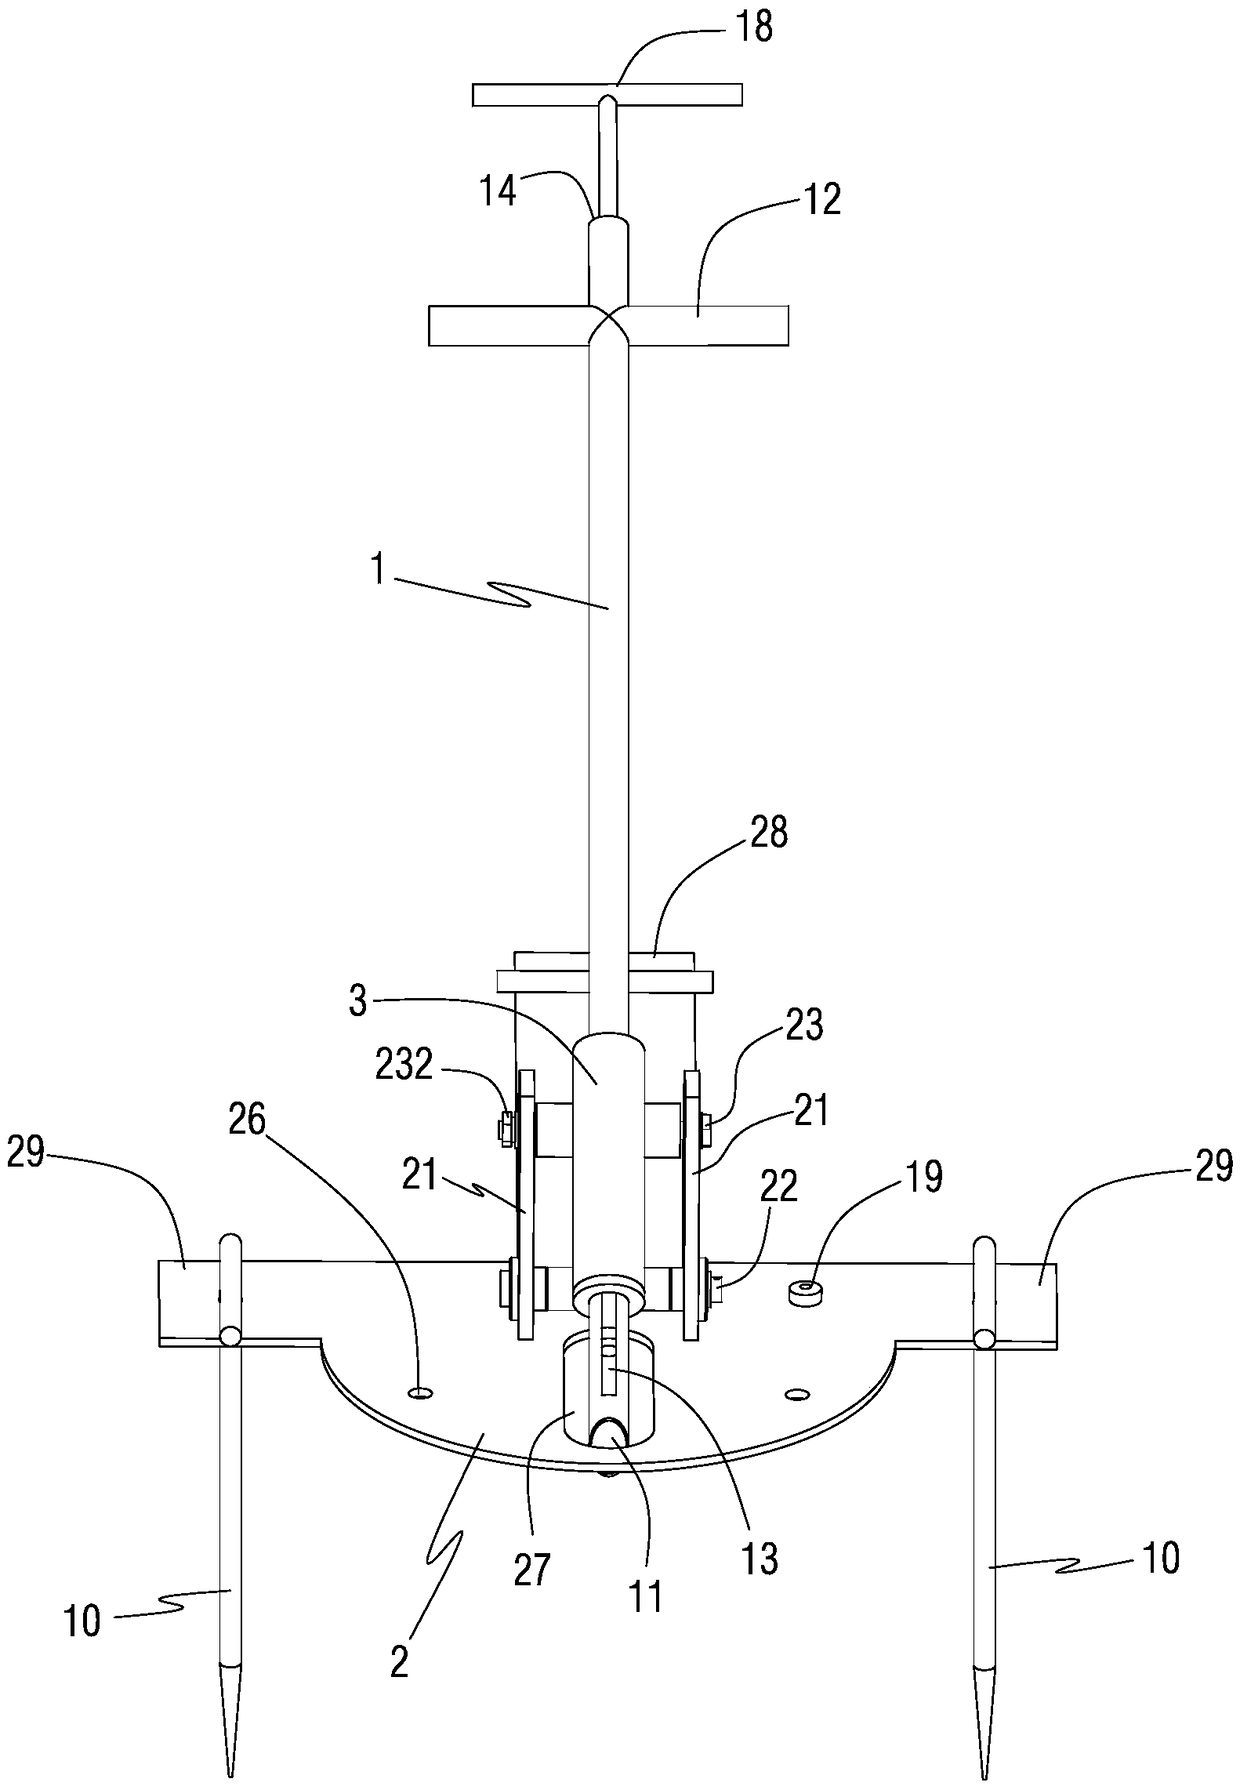 A ground drilling device for installing observation probes